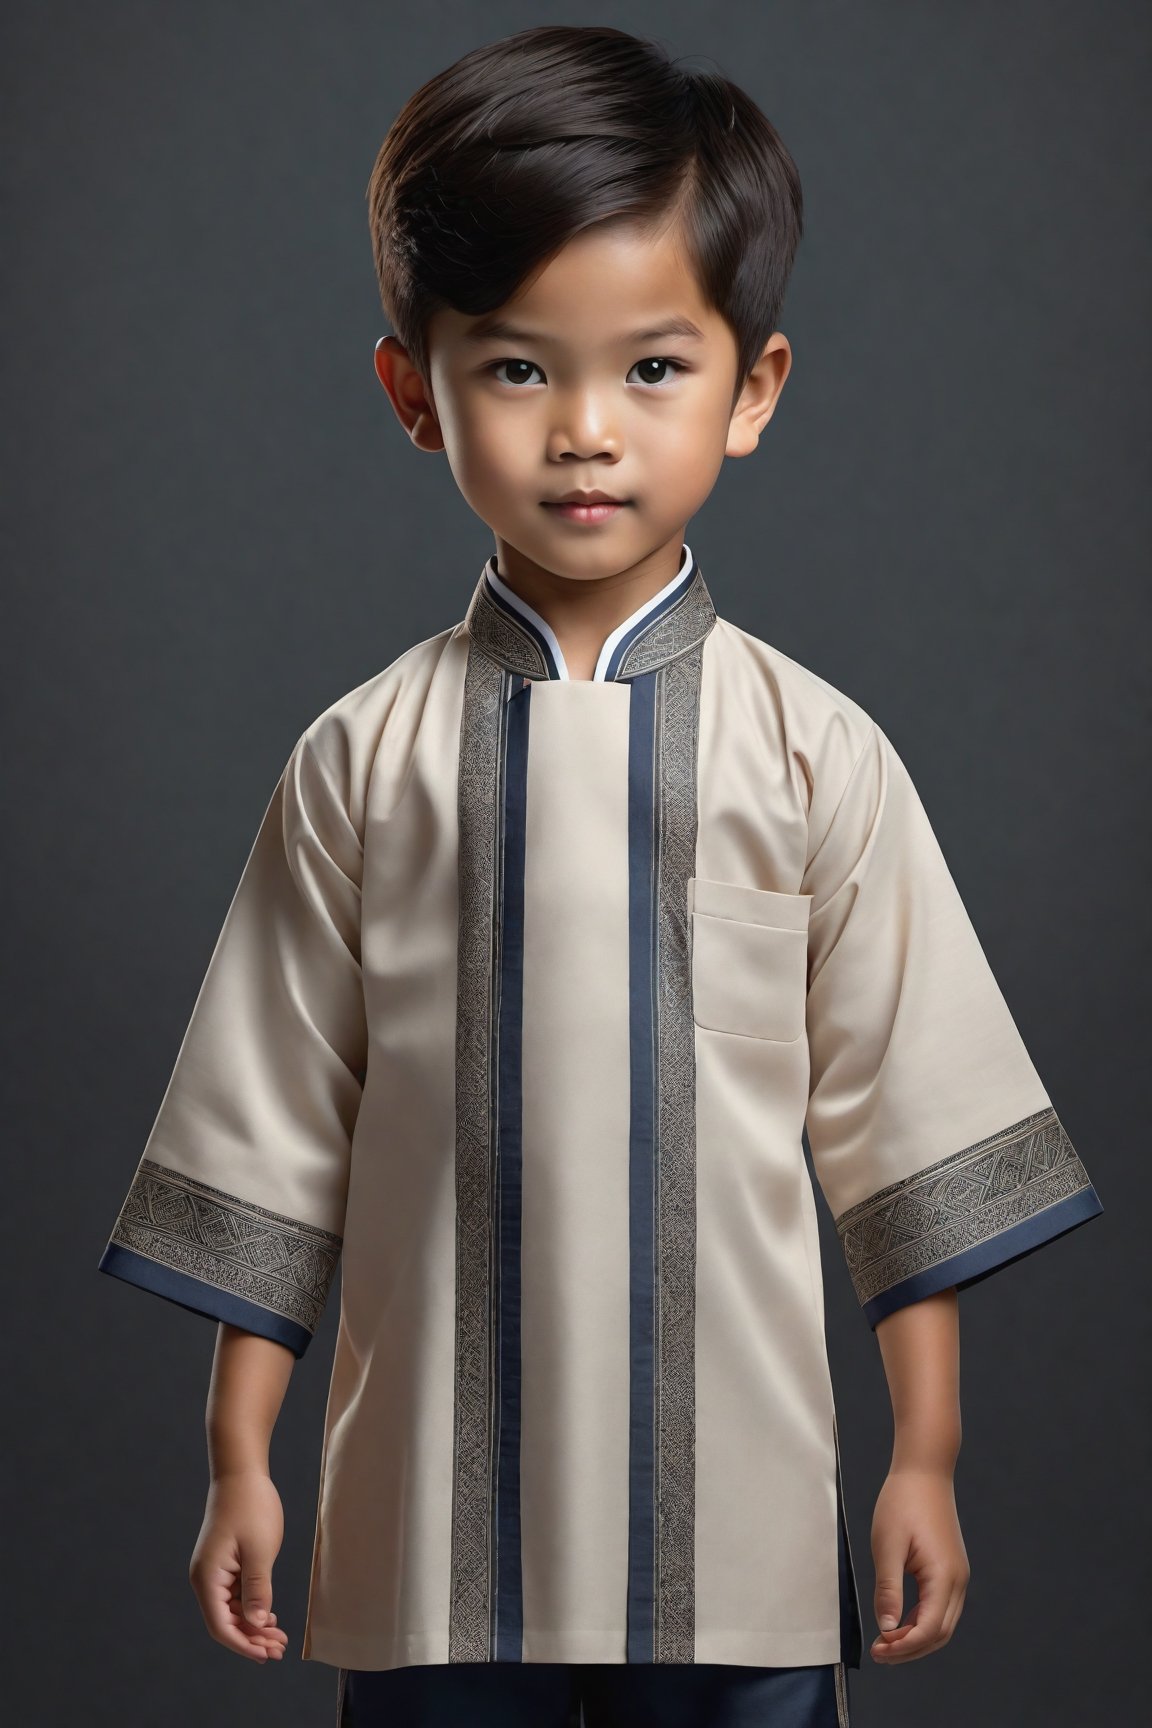 ((full body)) body_marking, highly detailed shot tribal version character of cute Vietnamese boy kid in aodai, masterpiece artwork, white accent, detailed face features, subtle gradients, extremely detailed, photorealistic, 8k, centered, perfect symmetrical, studio photography, muted color scheme, made with adobe illustrator, solid dark background 